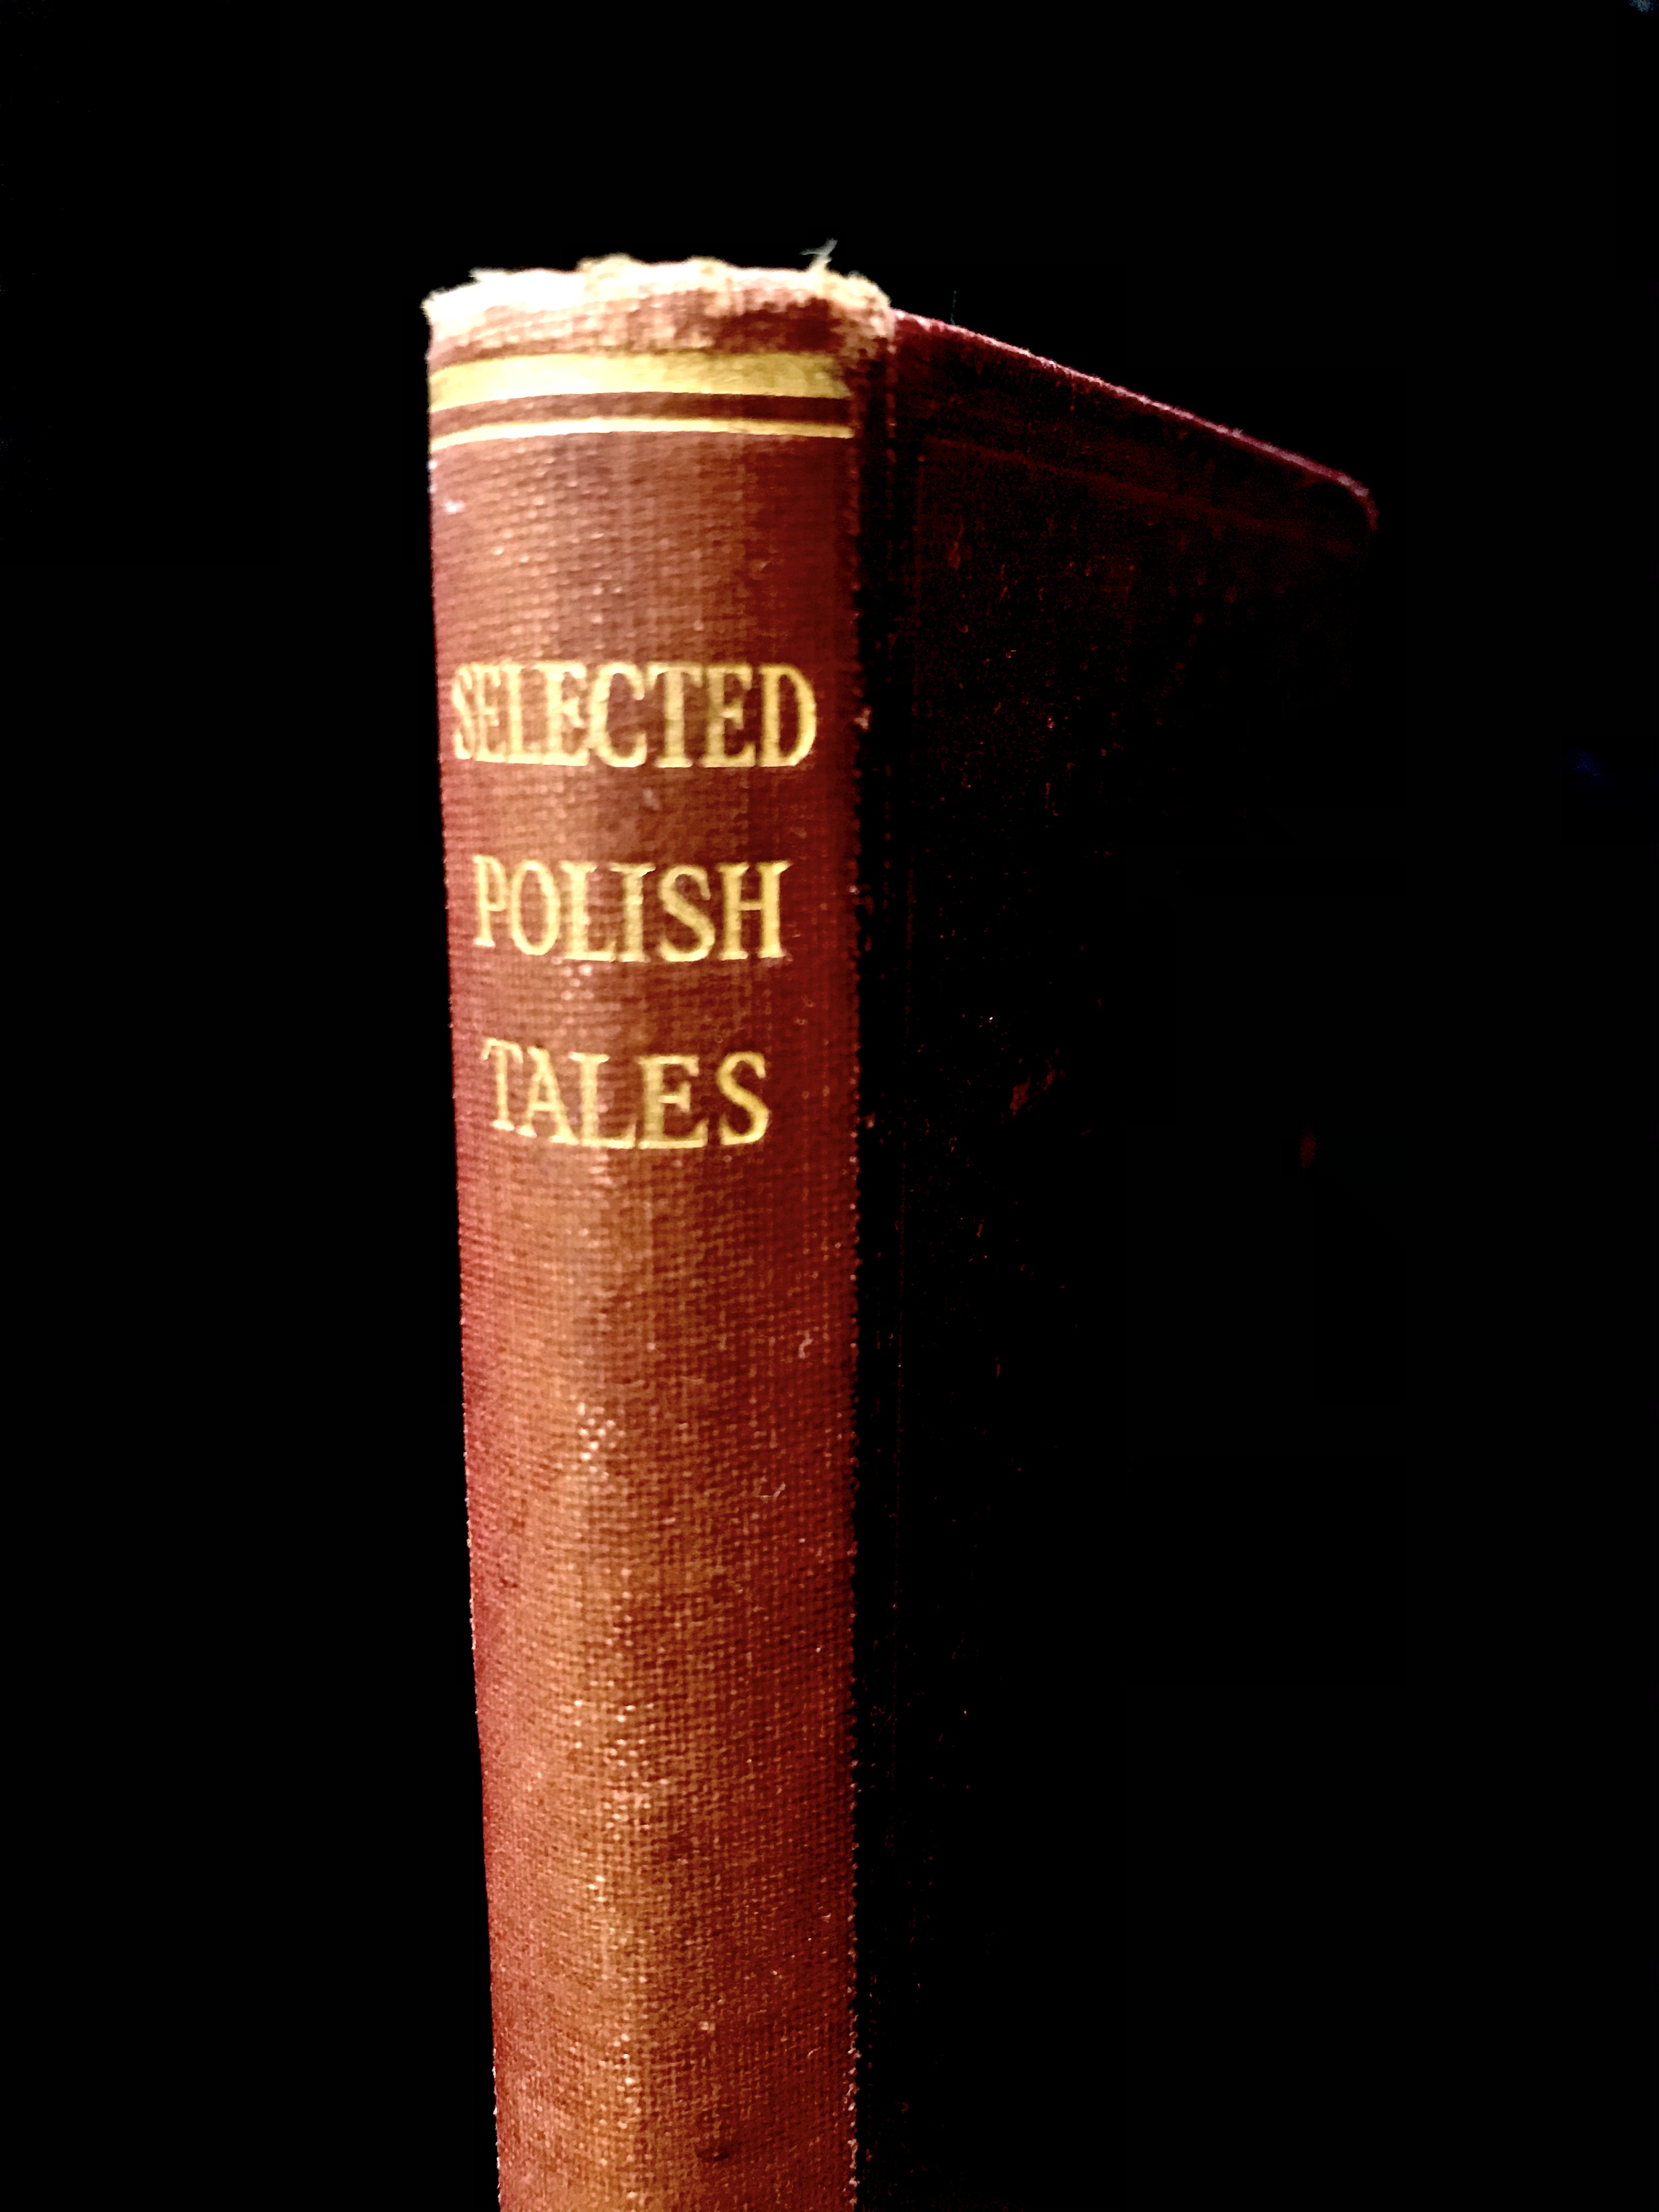 Selected Polish Tales Translated by Else C. M. Benecke & Marie Busch